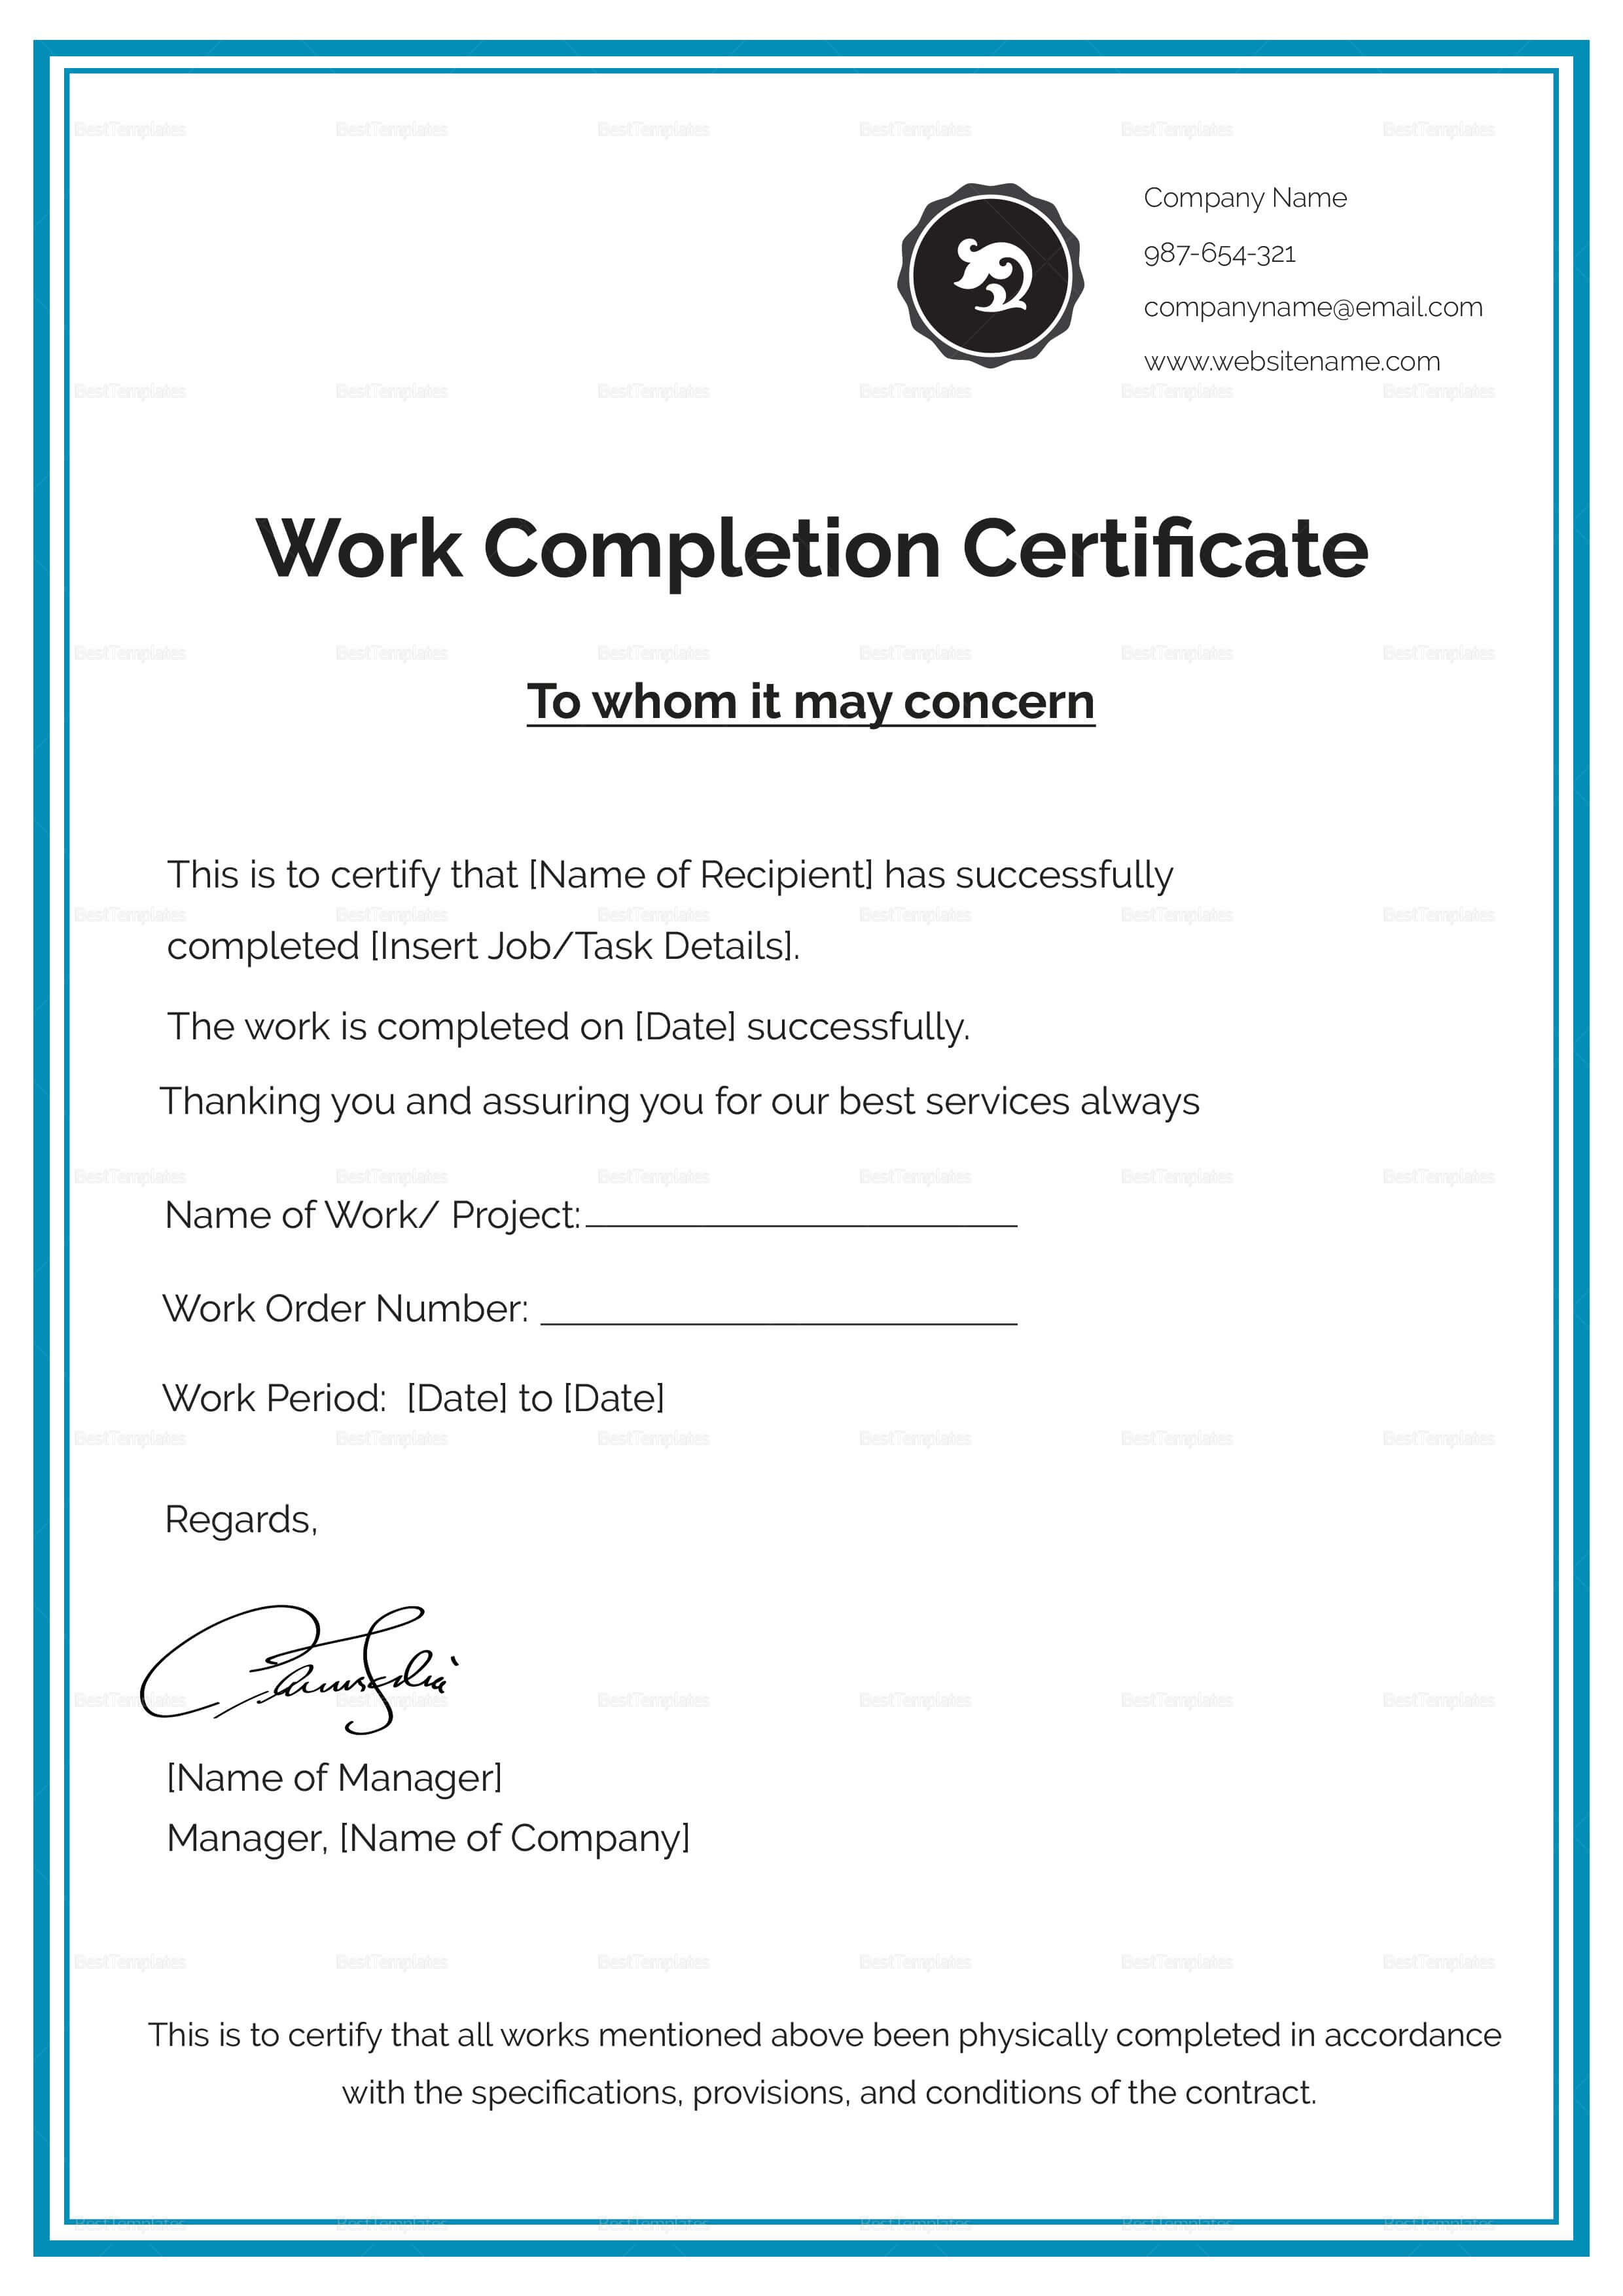 Pinadil Khan On Job In 2019 | Certificate Templates Within Certificate Template For Project Completion